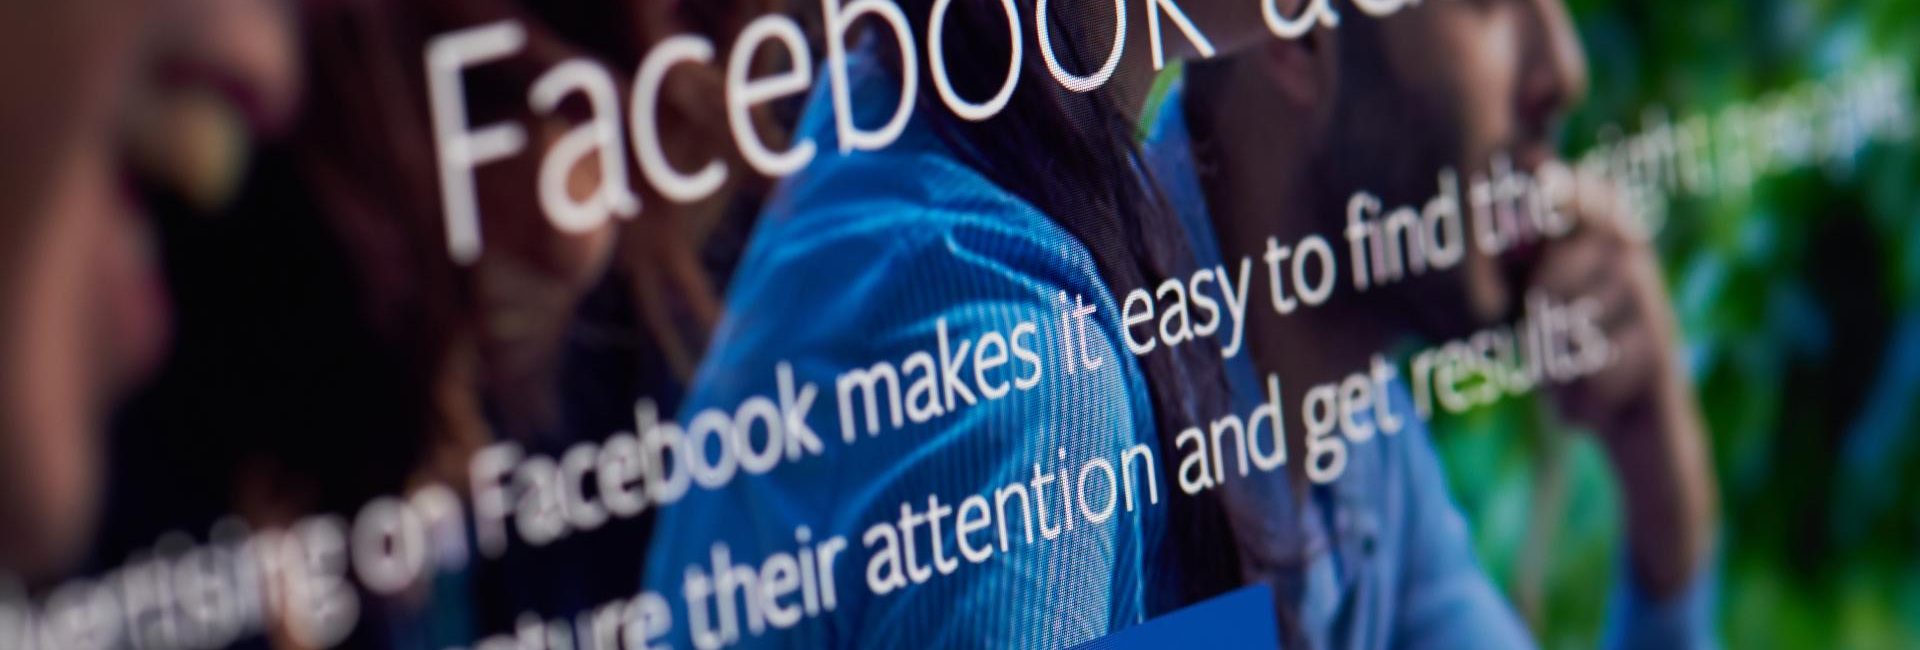 7 must-know Facebook Ads tips and features